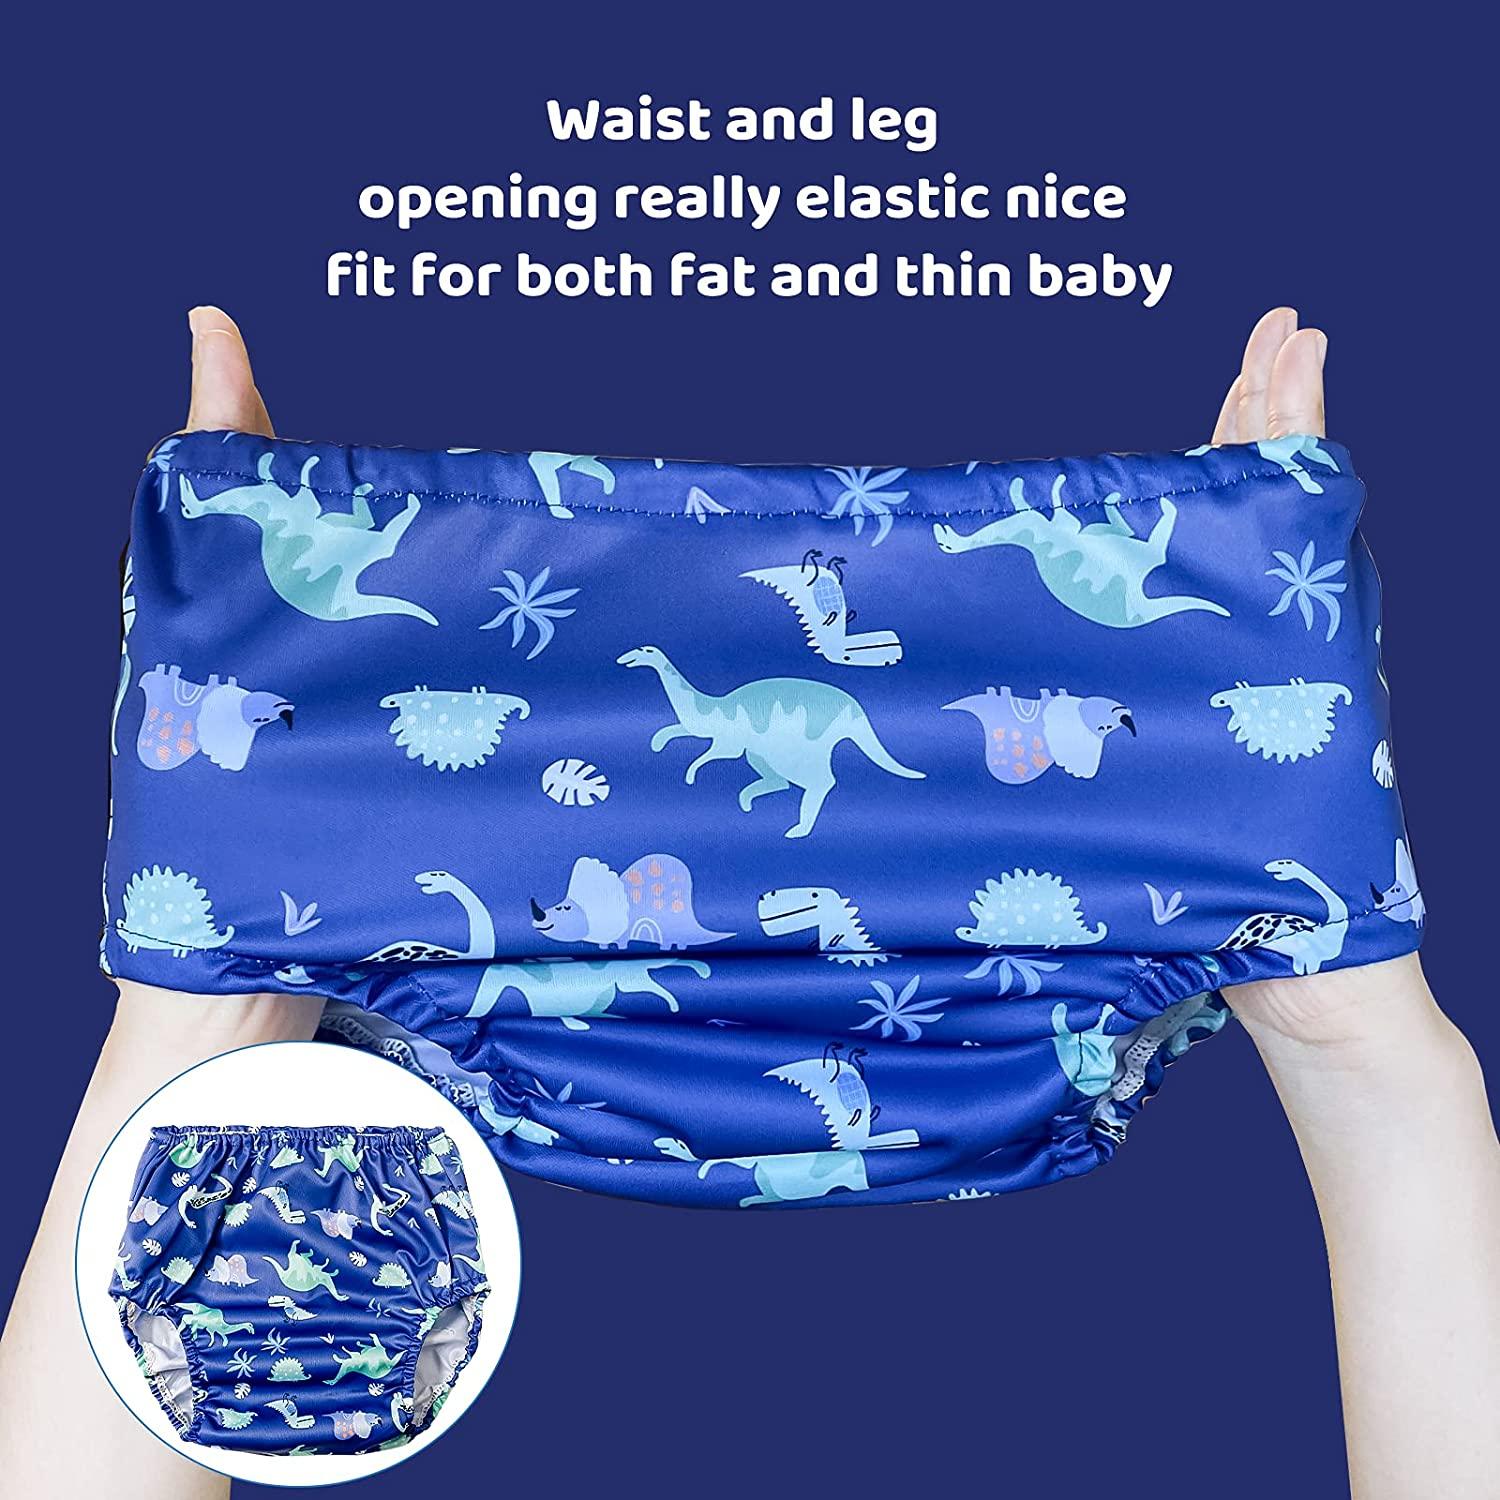 Waterproof Plastic Swim Diaper Cover for Plastic Pants Good Elastic Rubber  Pants for Toddlers Plastic Underwear Covers for Potty Training Pants Girl